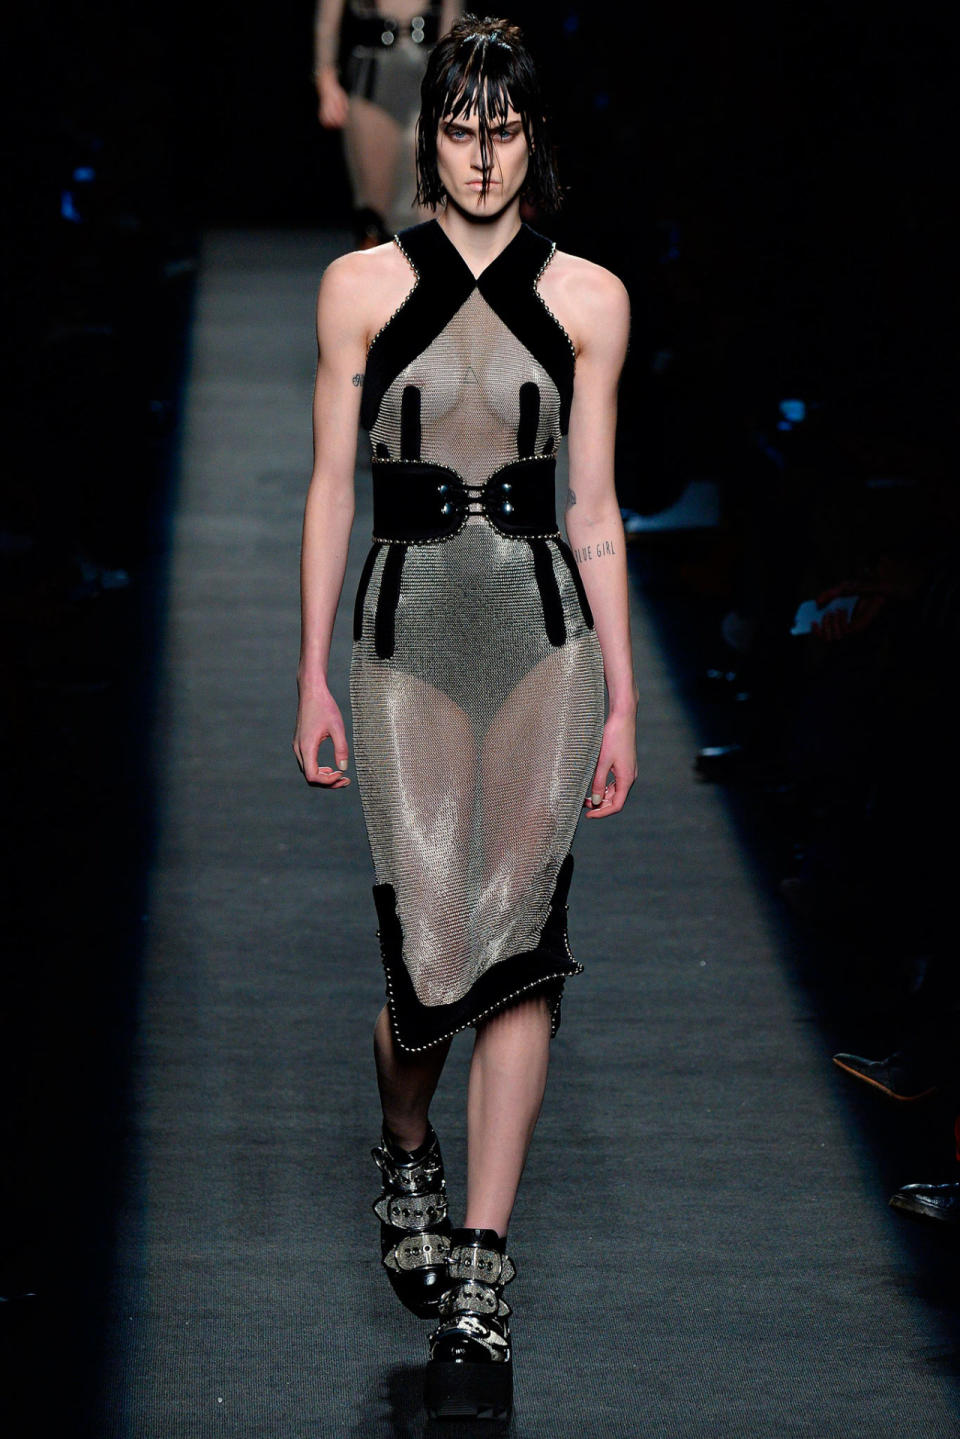 Parties happen on Mars, too! This Alexander Wang dress paired with chunky creeper boots would work in the environment.